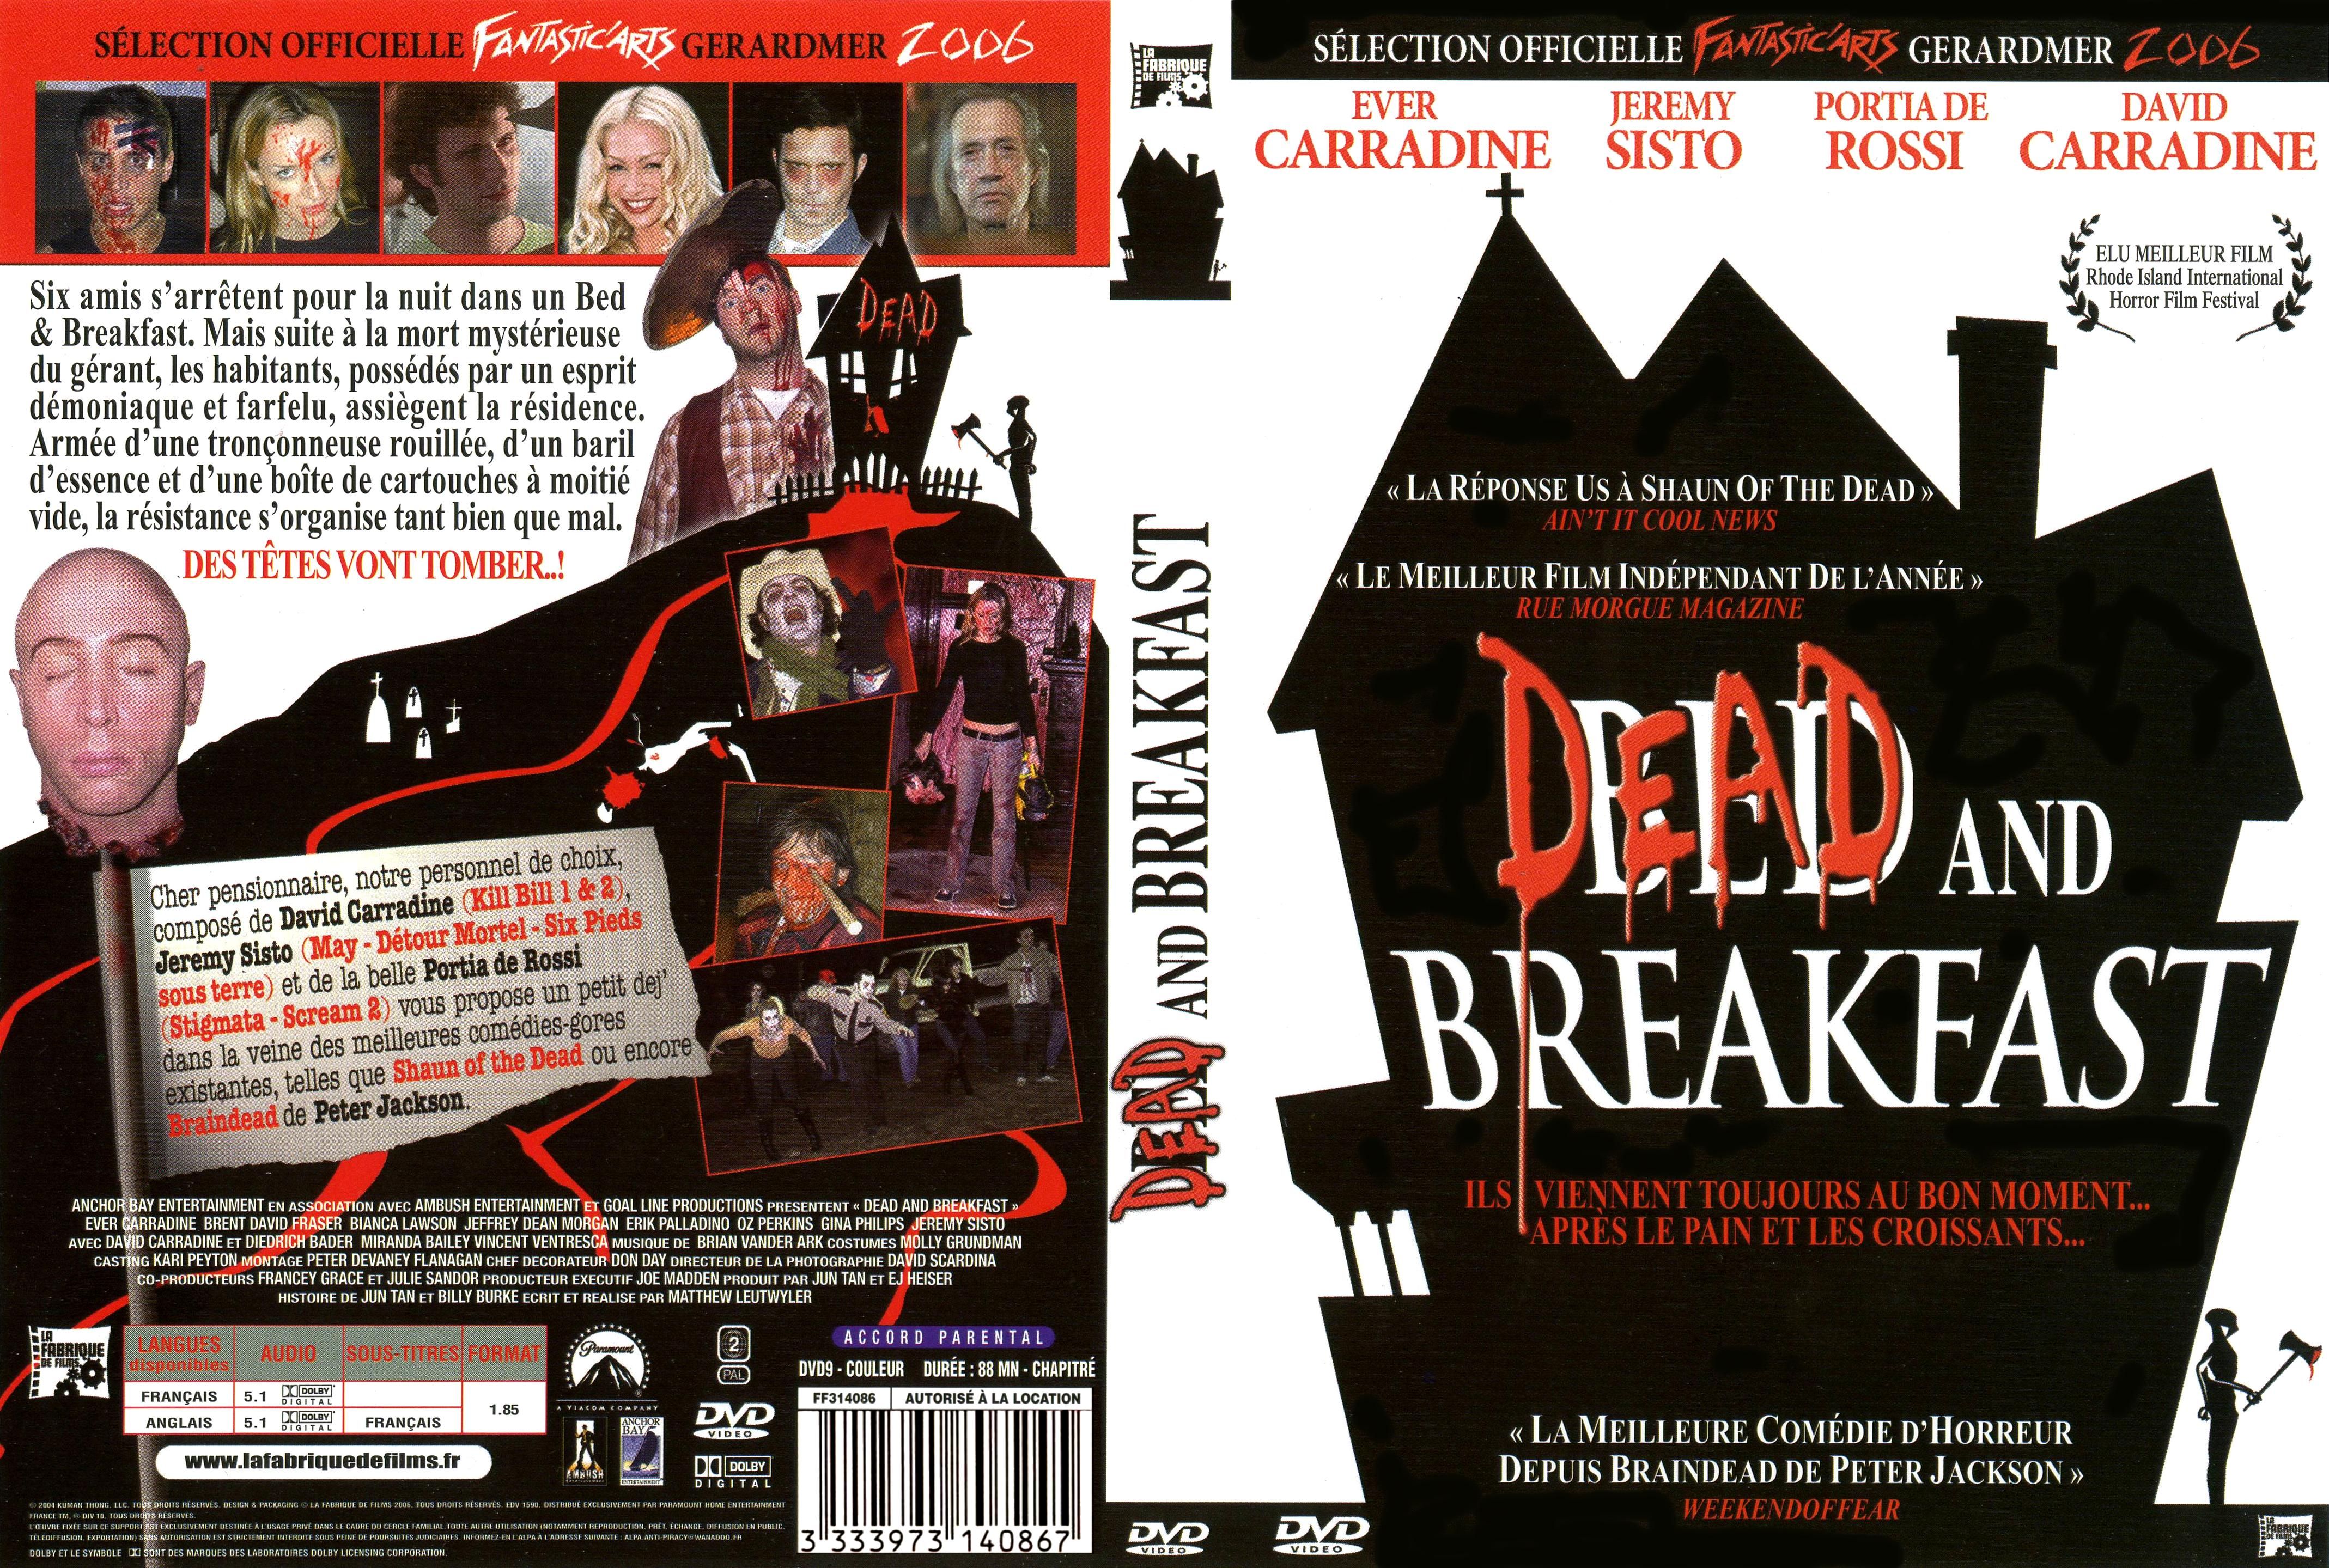 Jaquette DVD Dead and Breakfeast v2